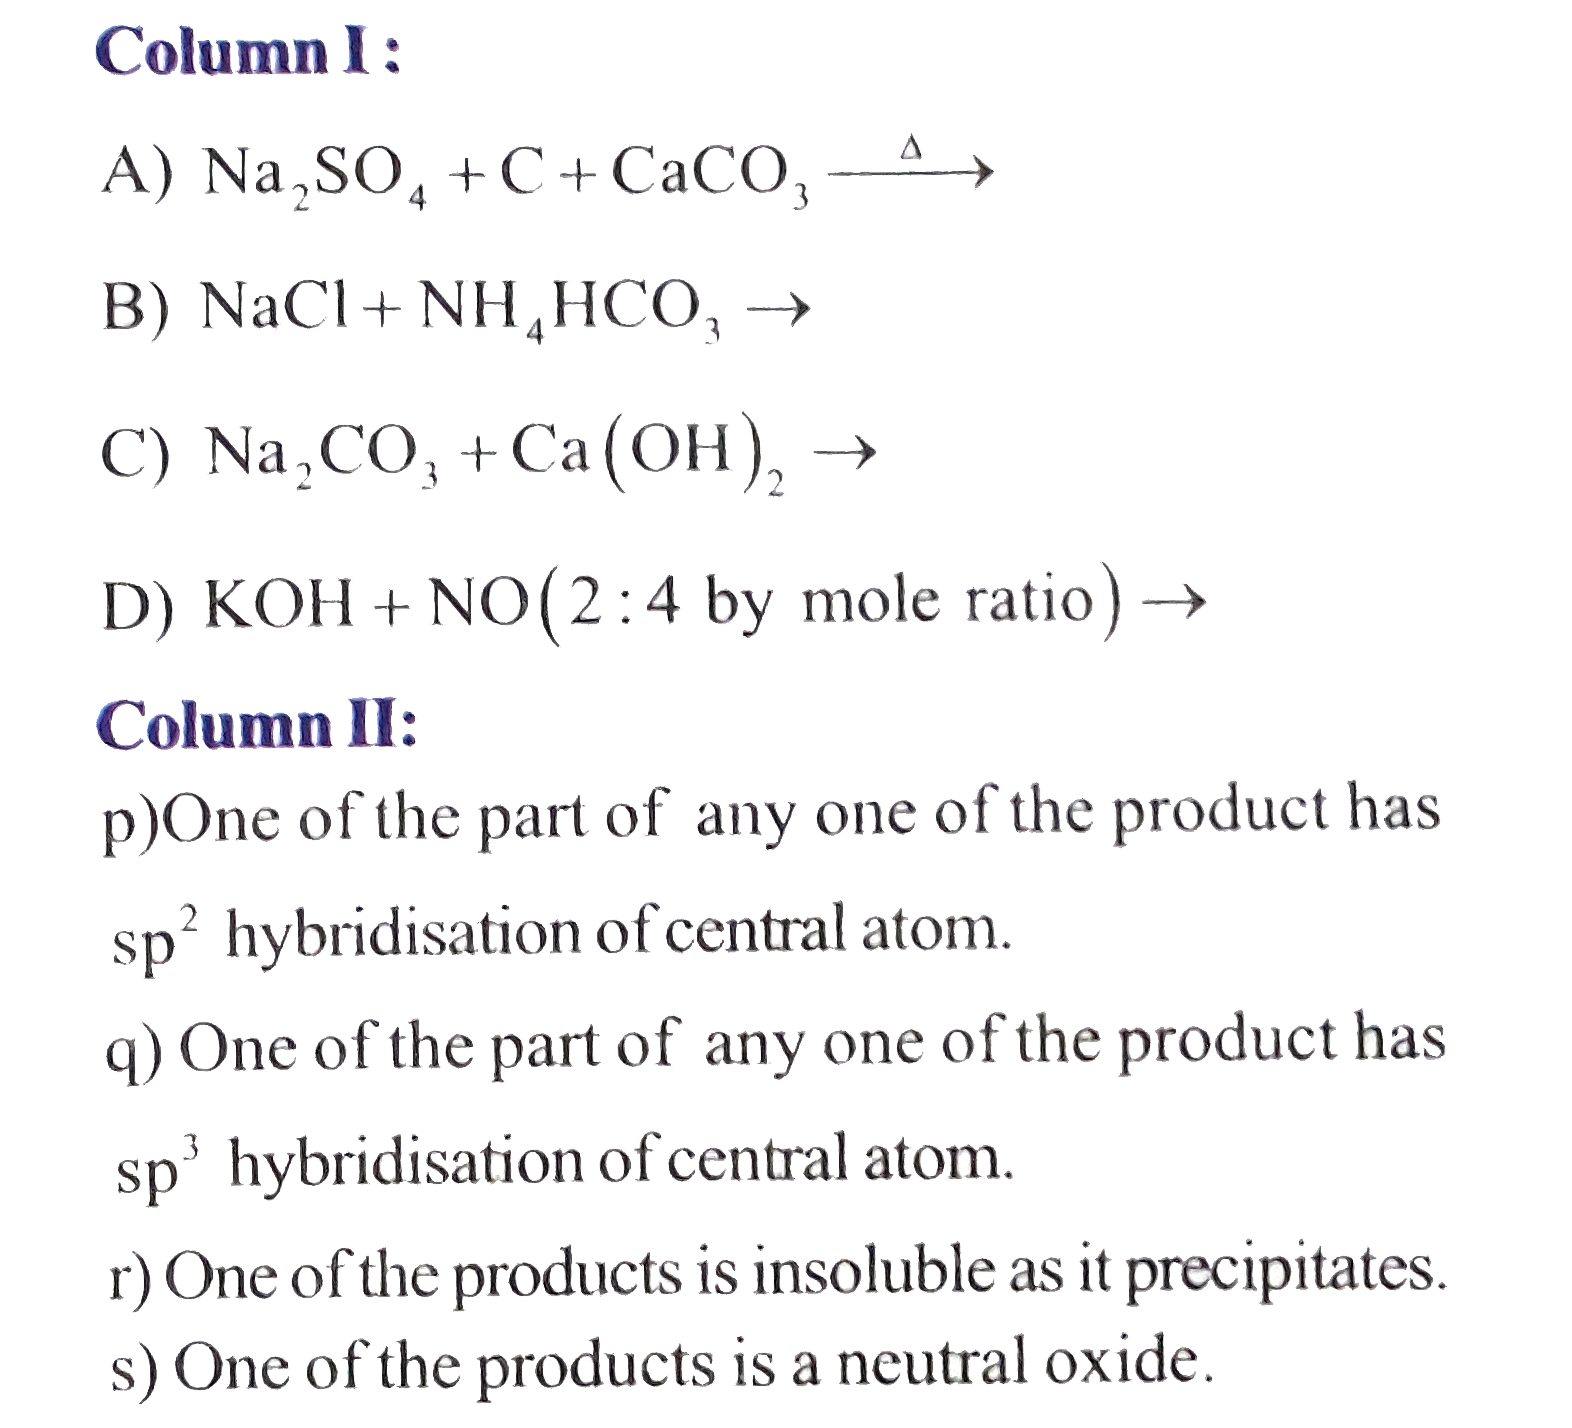 KI combines with I(2) and forms polyiodide . The number of hybrid orbitals on the central iodine atom is